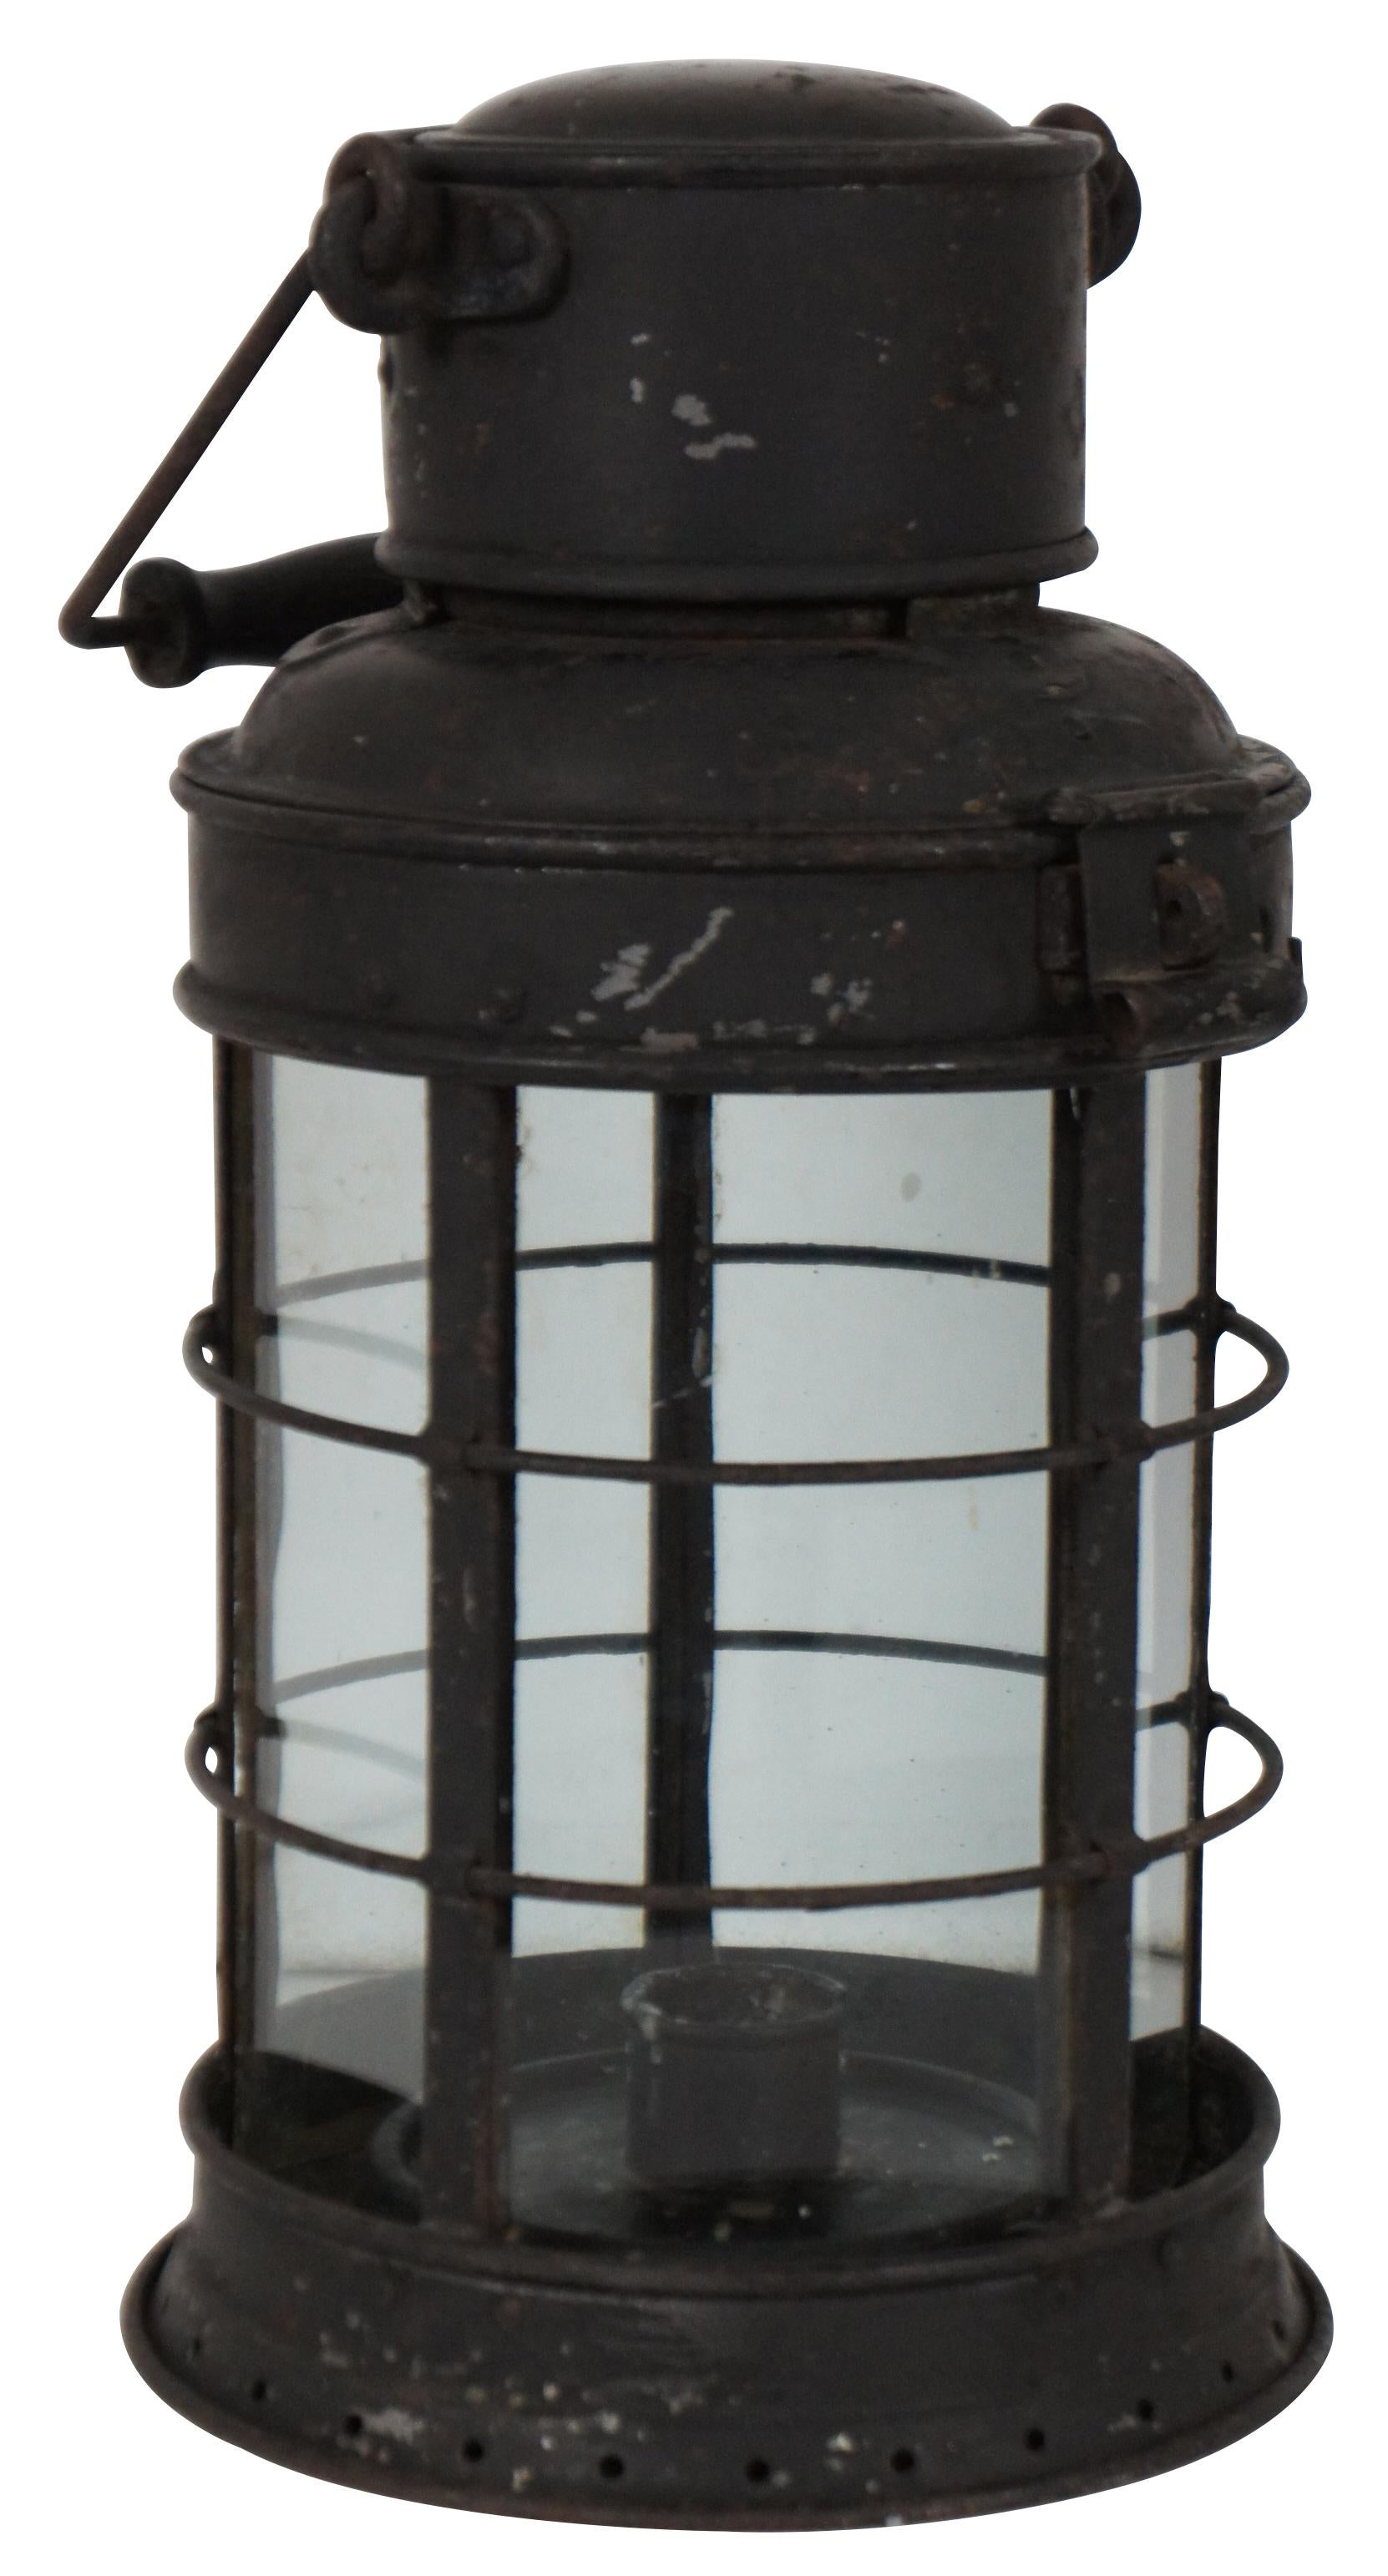 Circa 1880 - 1910 - this is a late Victorian candle lit lamp, most likely for Railway use, and was made by the firm Eli Griffiths and Son who were well known for manufacturing items for railways and shipping.
Made for candles and not oil